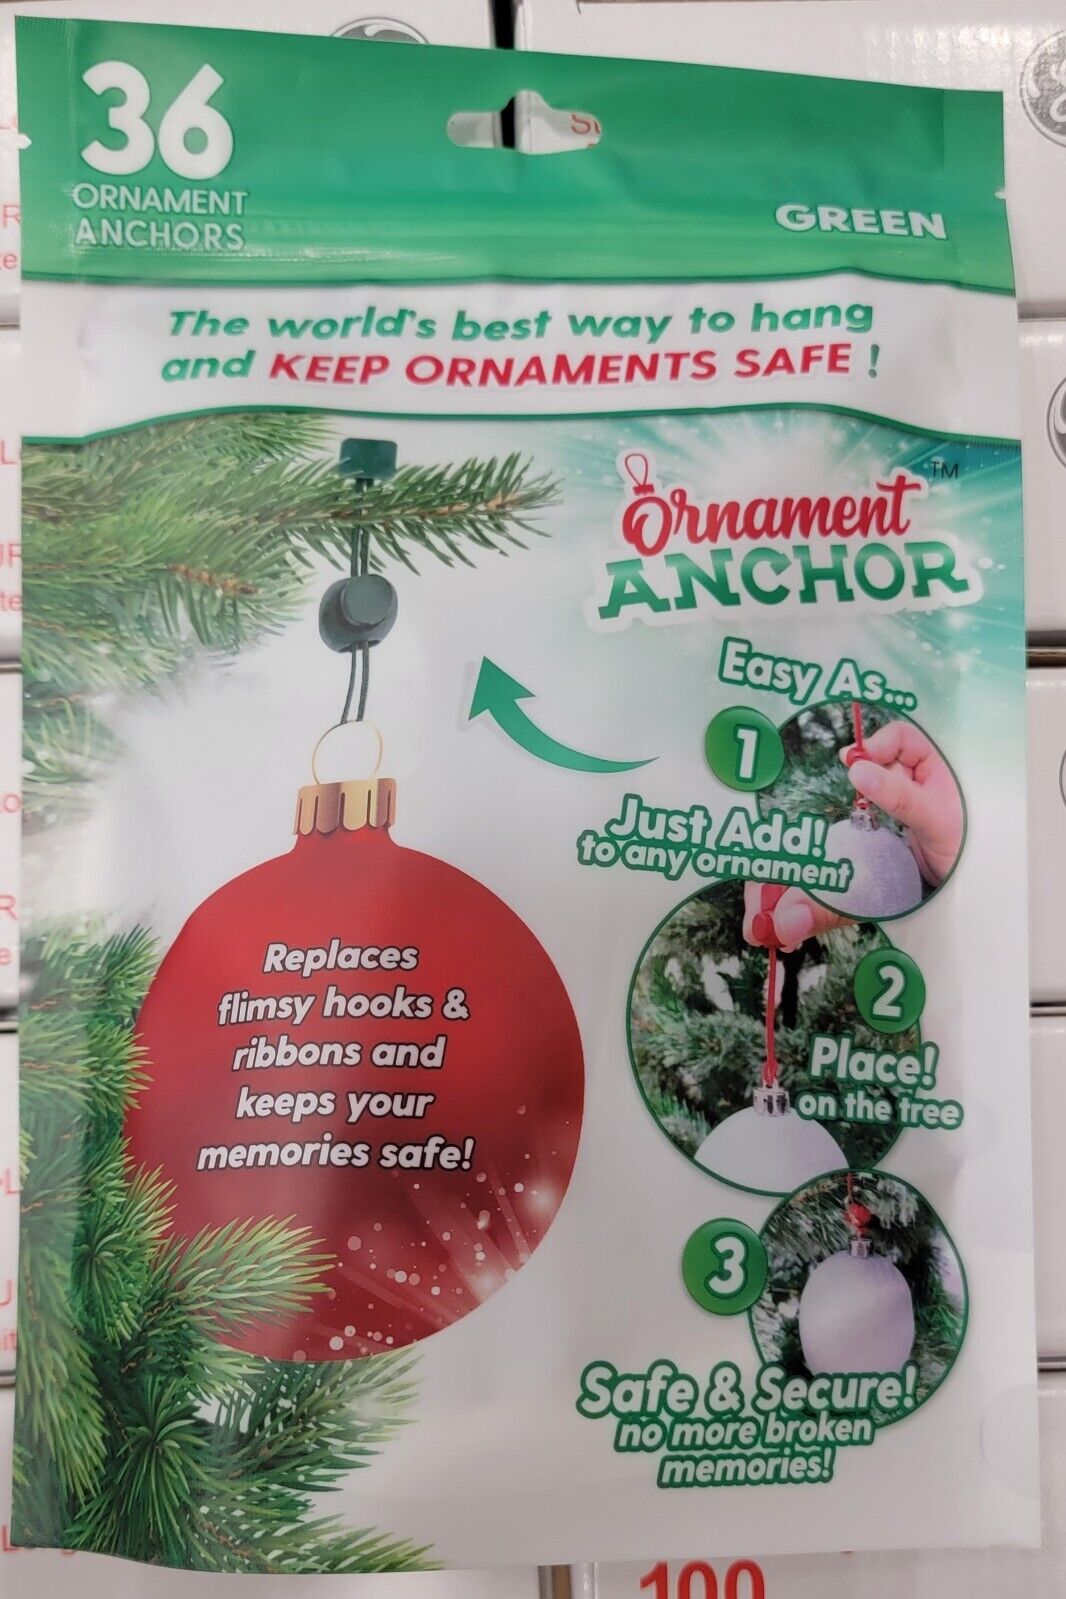 ORNAMENT ANCHOR Hooks for Hanging Christmas Decorations- 36pc - Shark Tank